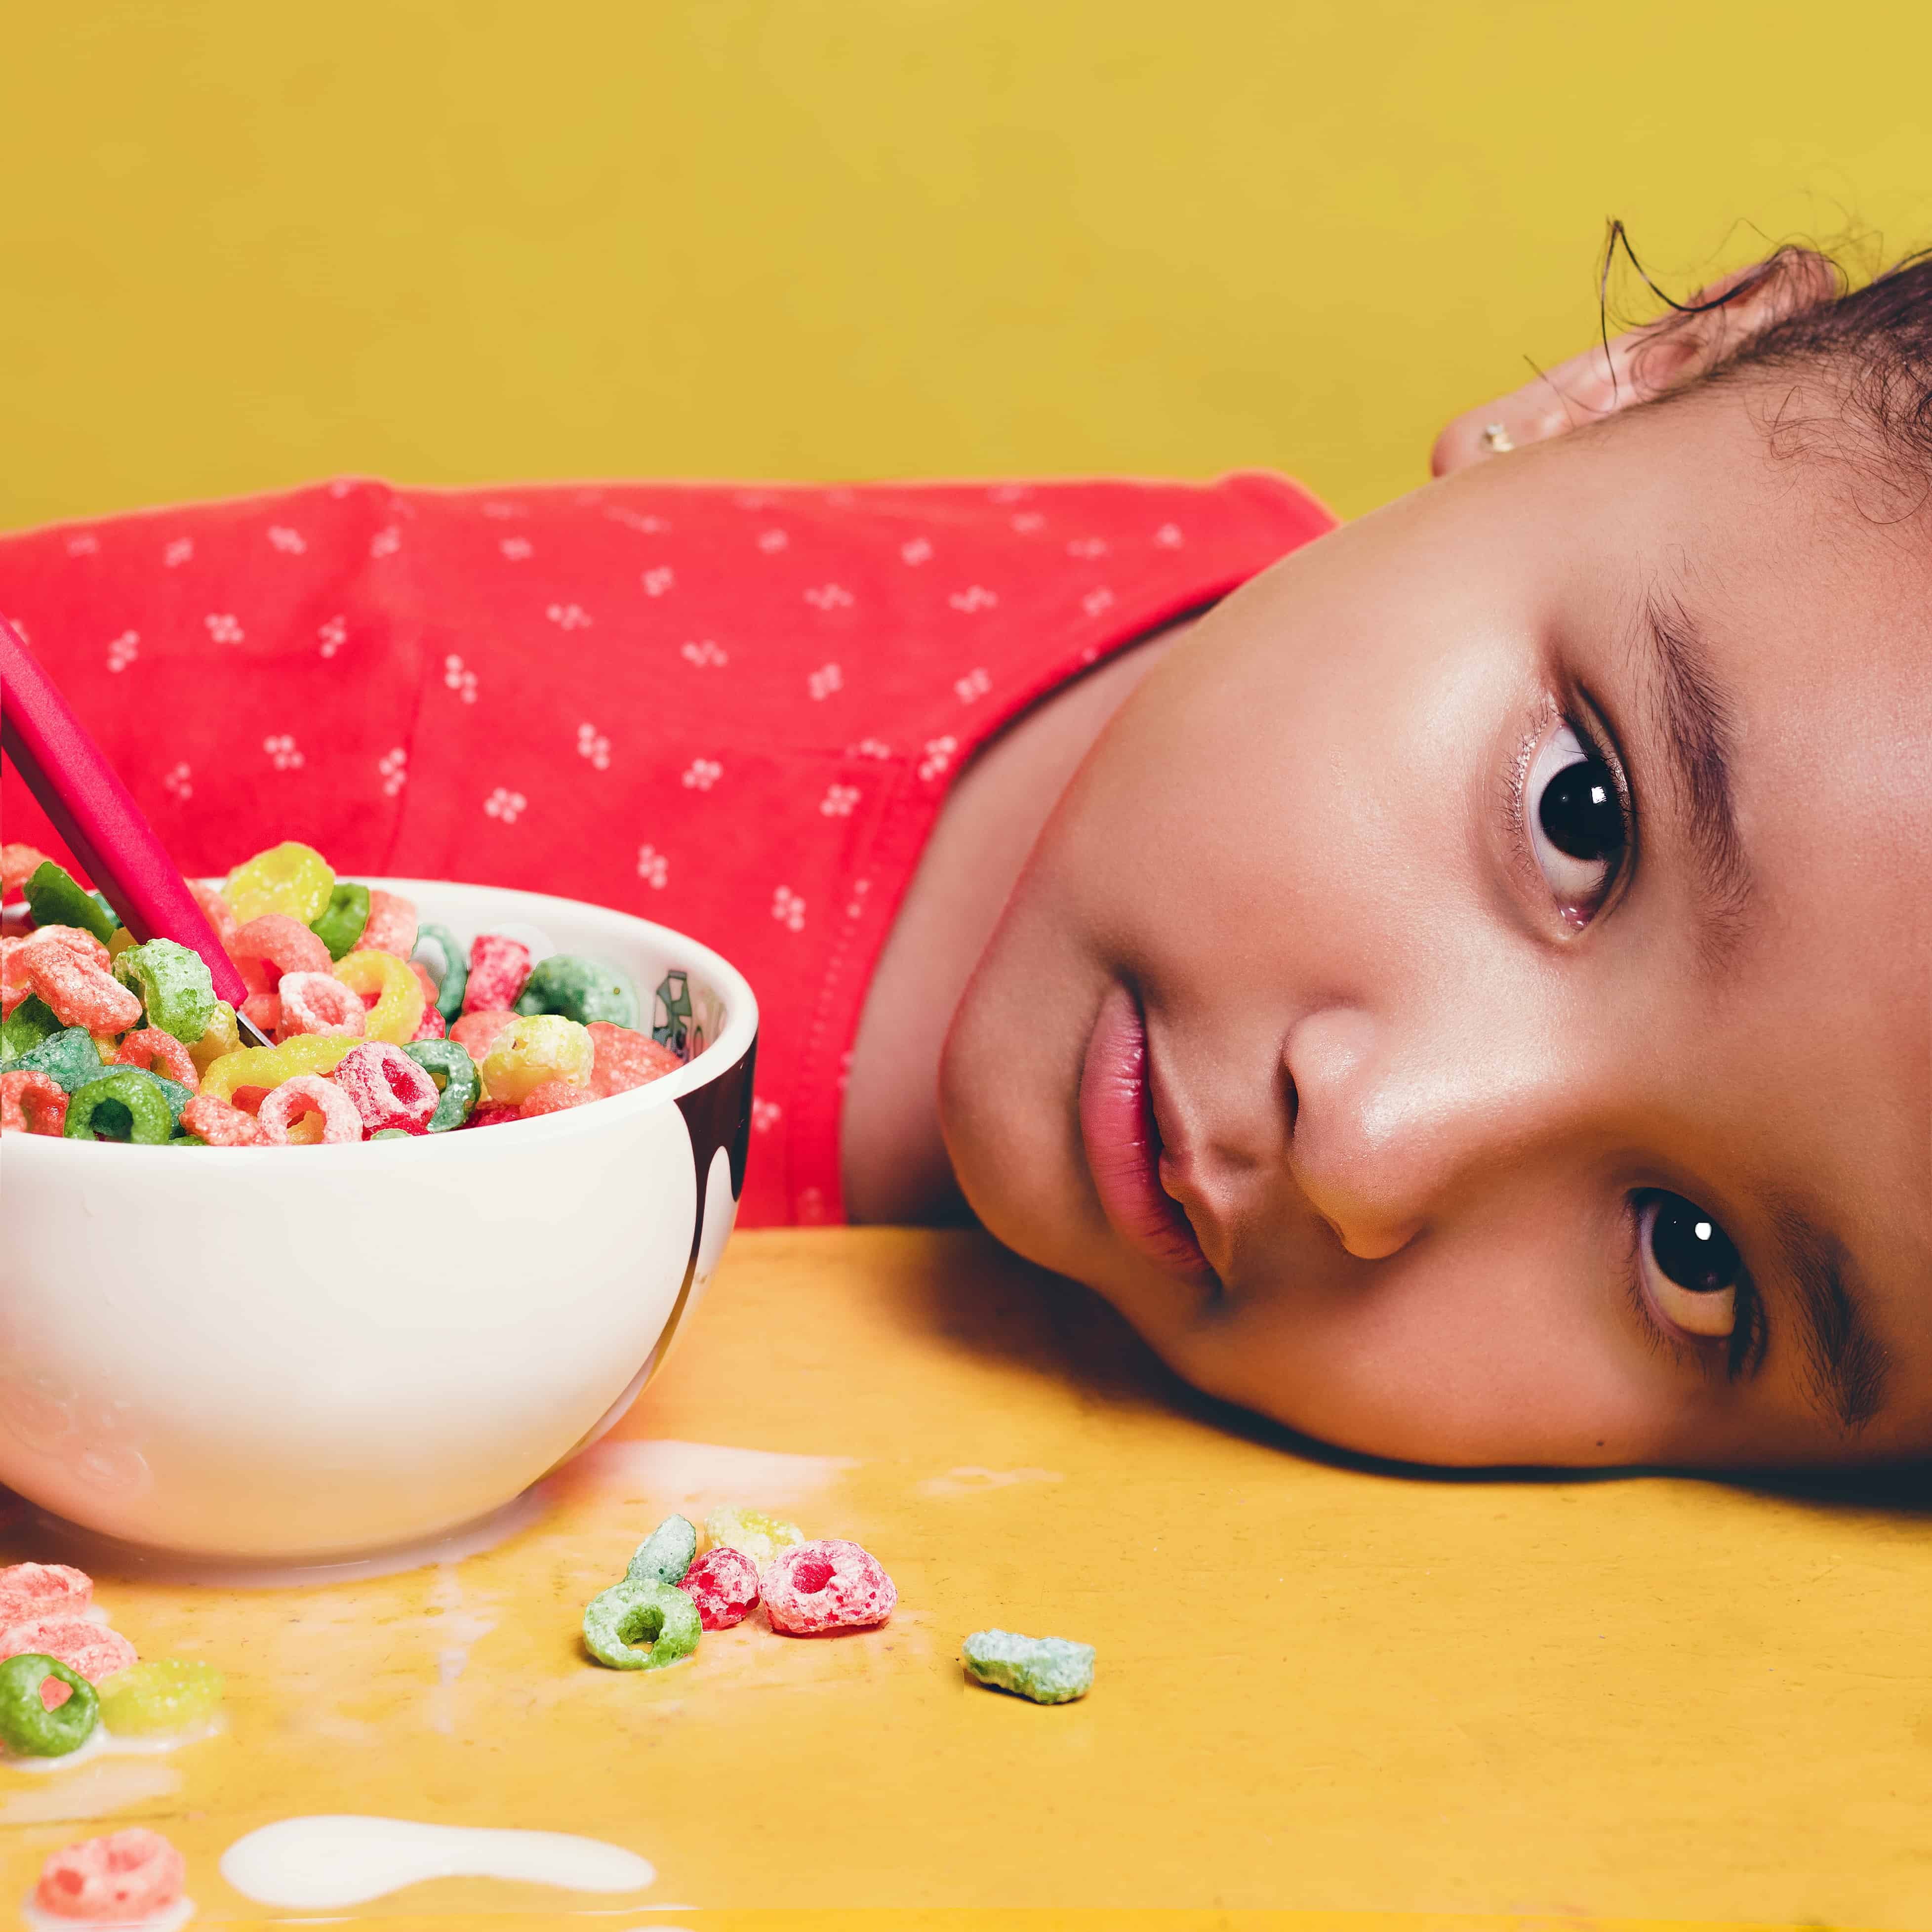 Child eating a bowl of cereal